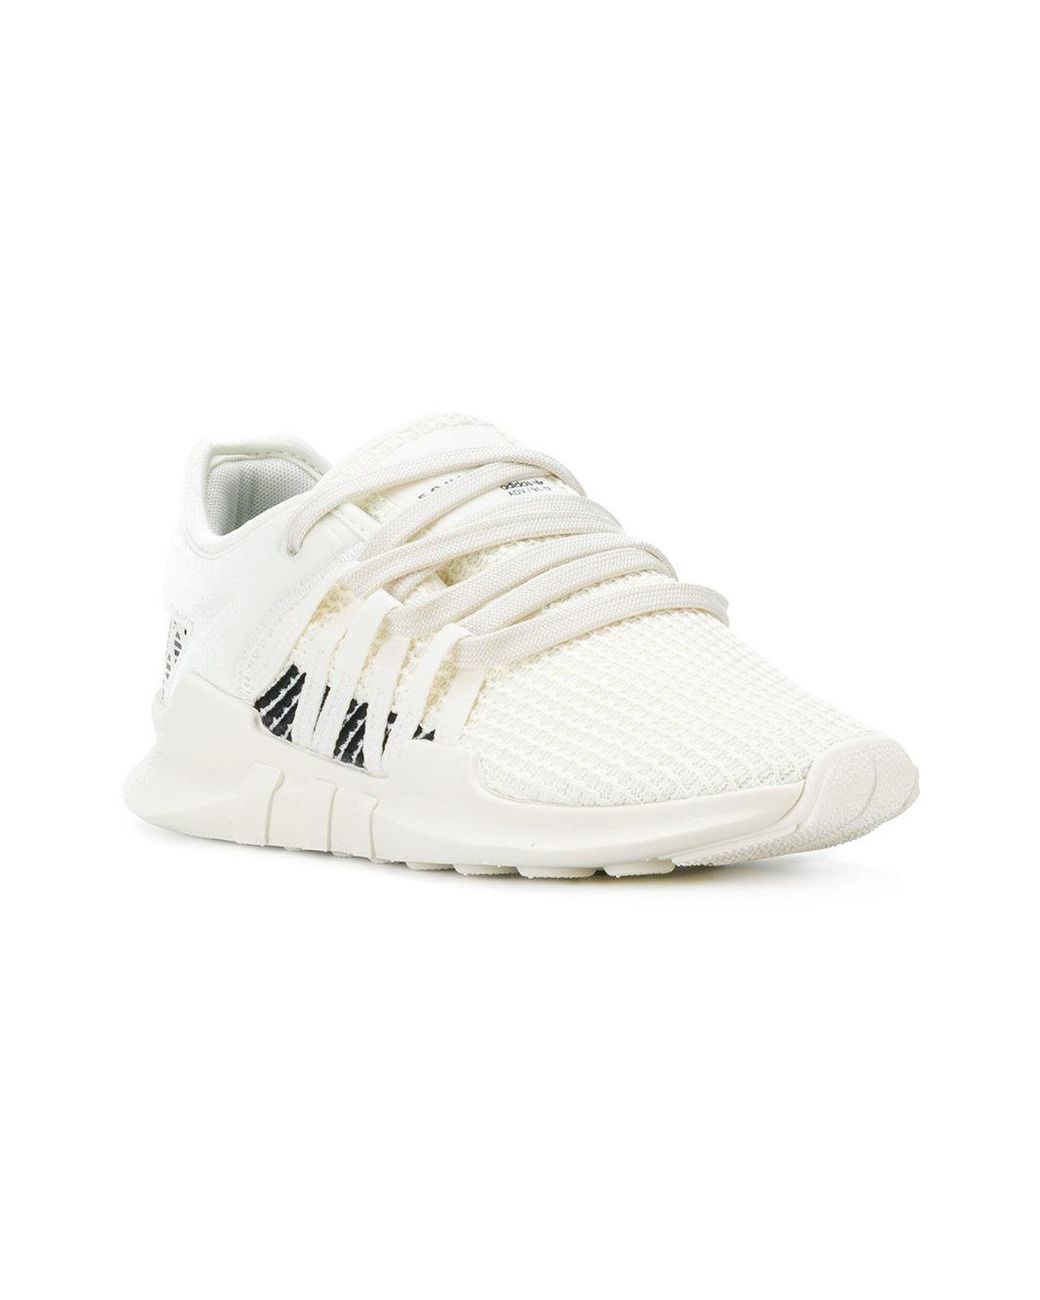 adidas Synthetic Originals Eqt Racing Adv 91/17 Sneakers in White | Lyst